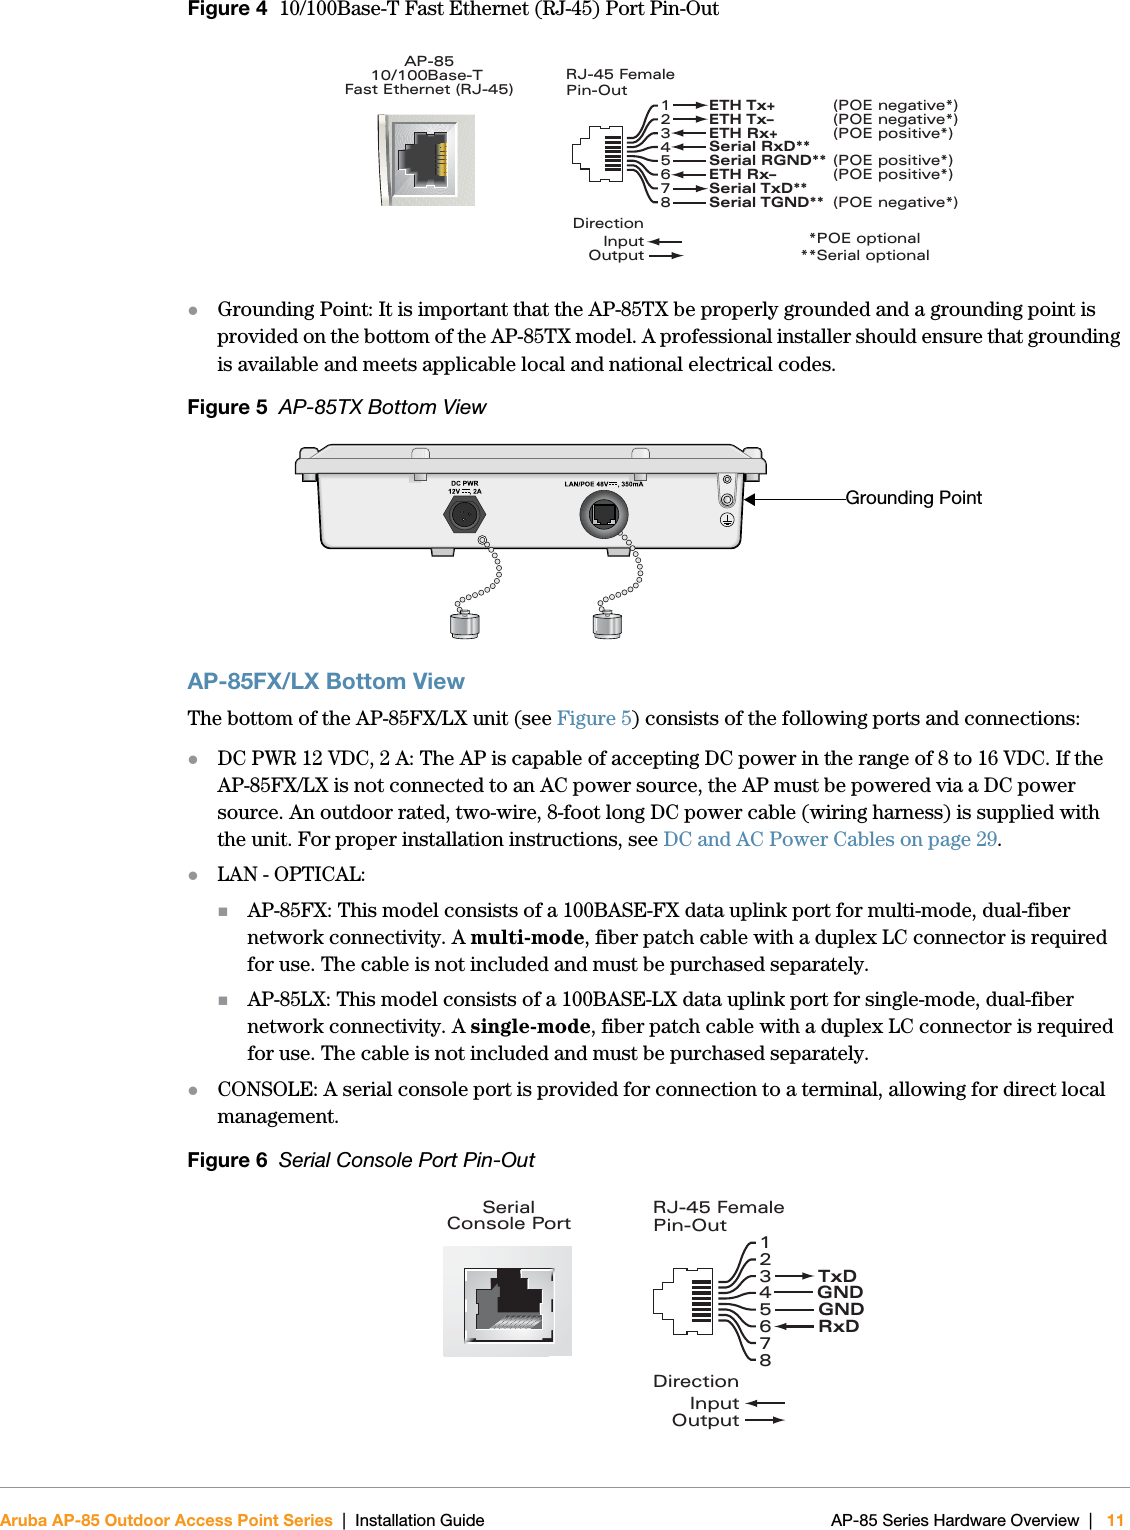  Aruba AP-85 Outdoor Access Point Series | Installation Guide AP-85 Series Hardware Overview | 11Figure 4  10/100Base-T Fast Ethernet (RJ-45) Port Pin-OutzGrounding Point: It is important that the AP-85TX be properly grounded and a grounding point is provided on the bottom of the AP-85TX model. A professional installer should ensure that grounding is available and meets applicable local and national electrical codes.Figure 5  AP-85TX Bottom ViewAP-85FX/LX Bottom ViewThe bottom of the AP-85FX/LX unit (see Figure 5) consists of the following ports and connections:zDC PWR 12 VDC, 2 A: The AP is capable of accepting DC power in the range of 8 to 16 VDC. If the AP-85FX/LX is not connected to an AC power source, the AP must be powered via a DC power source. An outdoor rated, two-wire, 8-foot long DC power cable (wiring harness) is supplied with the unit. For proper installation instructions, see DC and AC Power Cables on page 29.zLAN - OPTICAL: AP-85FX: This model consists of a 100BASE-FX data uplink port for multi-mode, dual-fiber network connectivity. A multi-mode, fiber patch cable with a duplex LC connector is required for use. The cable is not included and must be purchased separately. AP-85LX: This model consists of a 100BASE-LX data uplink port for single-mode, dual-fiber network connectivity. A single-mode, fiber patch cable with a duplex LC connector is required for use. The cable is not included and must be purchased separately.zCONSOLE: A serial console port is provided for connection to a terminal, allowing for direct local management.Figure 6  Serial Console Port Pin-OutAP-8510/100Base-TFast Ethernet (RJ-45)RJ-45 FemalePin-Out*POE optional**Serial optionalSerial RxD**Serial RGND** (POE positive*) Serial TxD**Serial TGND** (POE negative*)12345678ETH Tx+ (POE negative*)ETH Tx– (POE negative*)ETH Rx+ (POE positive*)ETH Rx– (POE positive*)DirectionInputOutputGrounding PointSerialConsole Port12345678TxDGNDRxDRJ-45 FemalePin-OutDirectionInputOutputGND